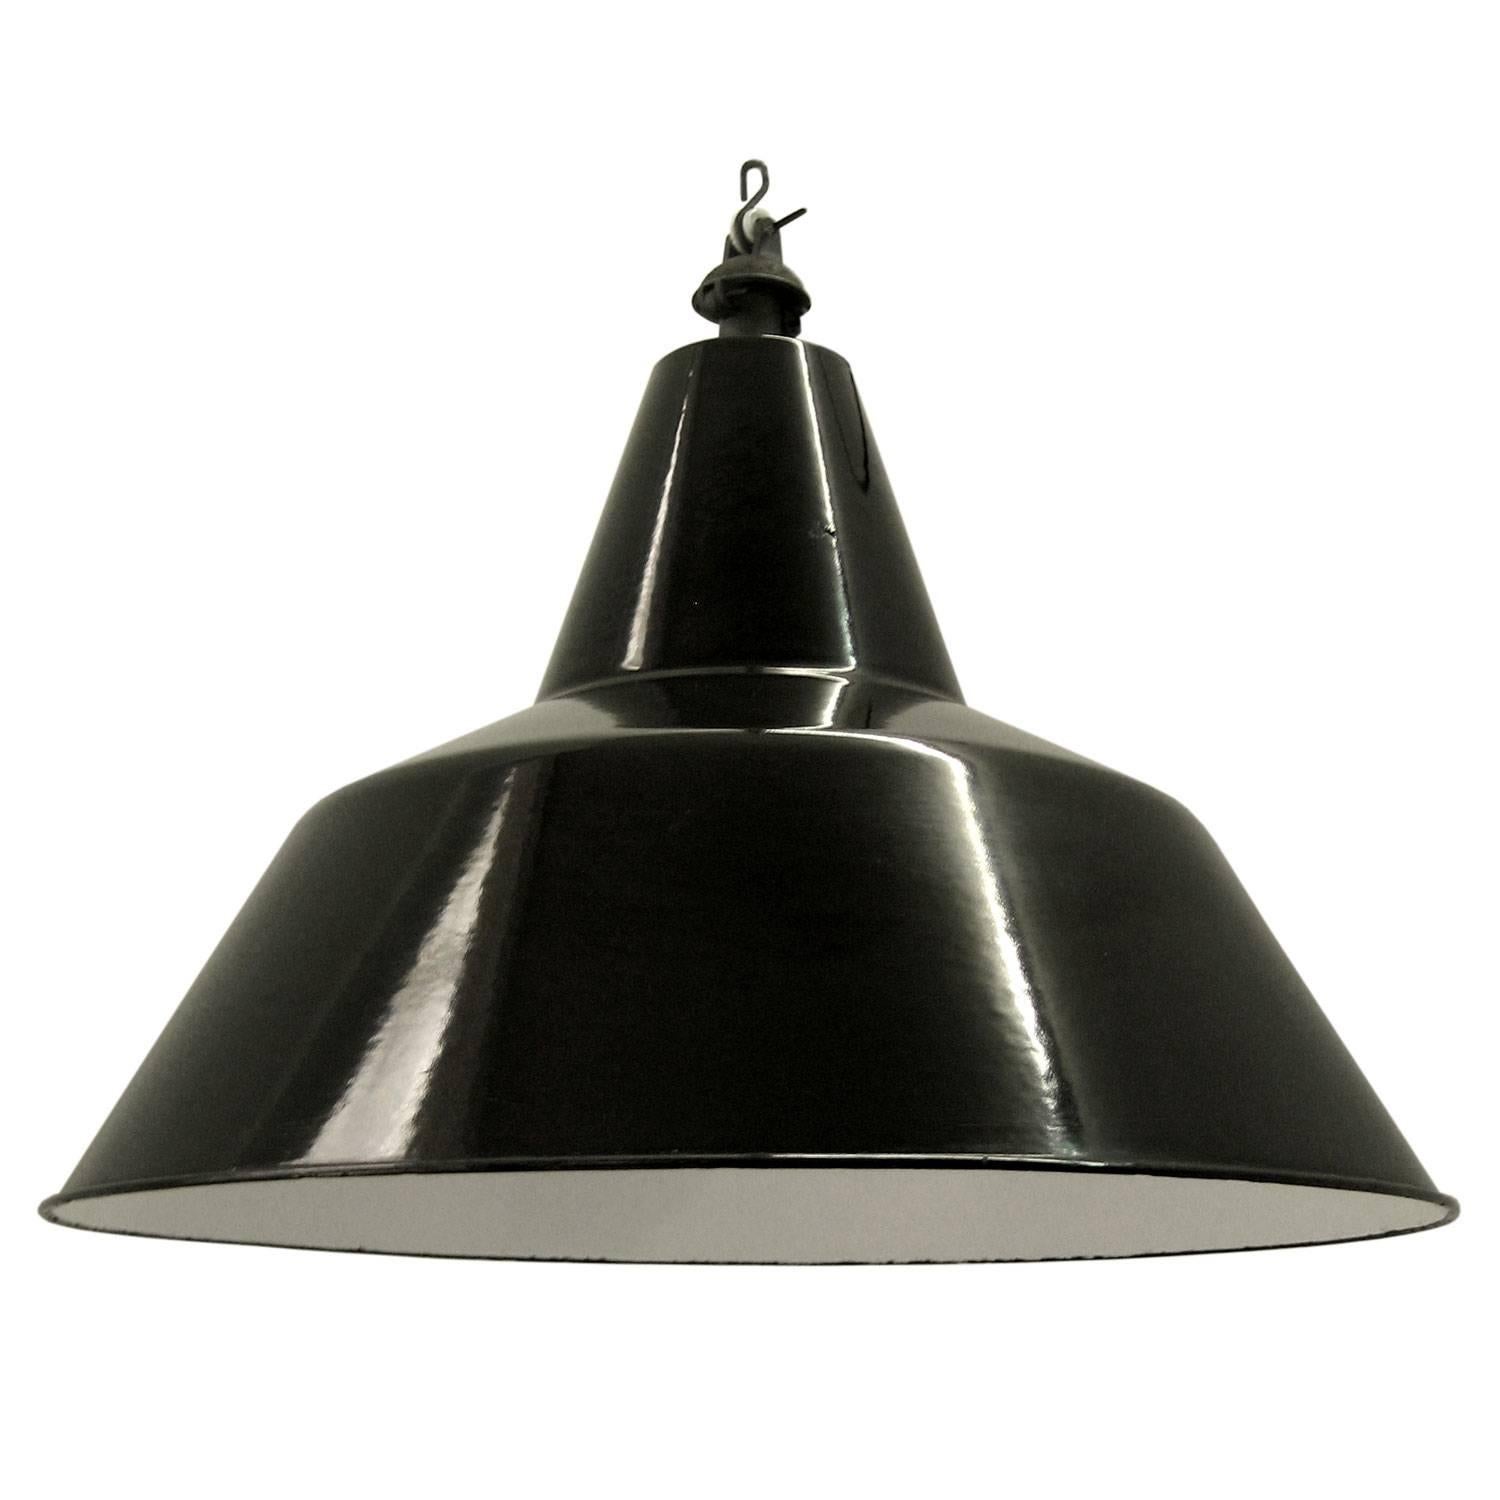 Industrial hanging lamp. Black enamel white interior.

Measure: Weight 2.0 kg / 4.4 lb

All lamps have been made suitable by international standards for incandescent light bulbs, energy-efficient and LED bulbs. E26/E27 bulb holders and new wiring